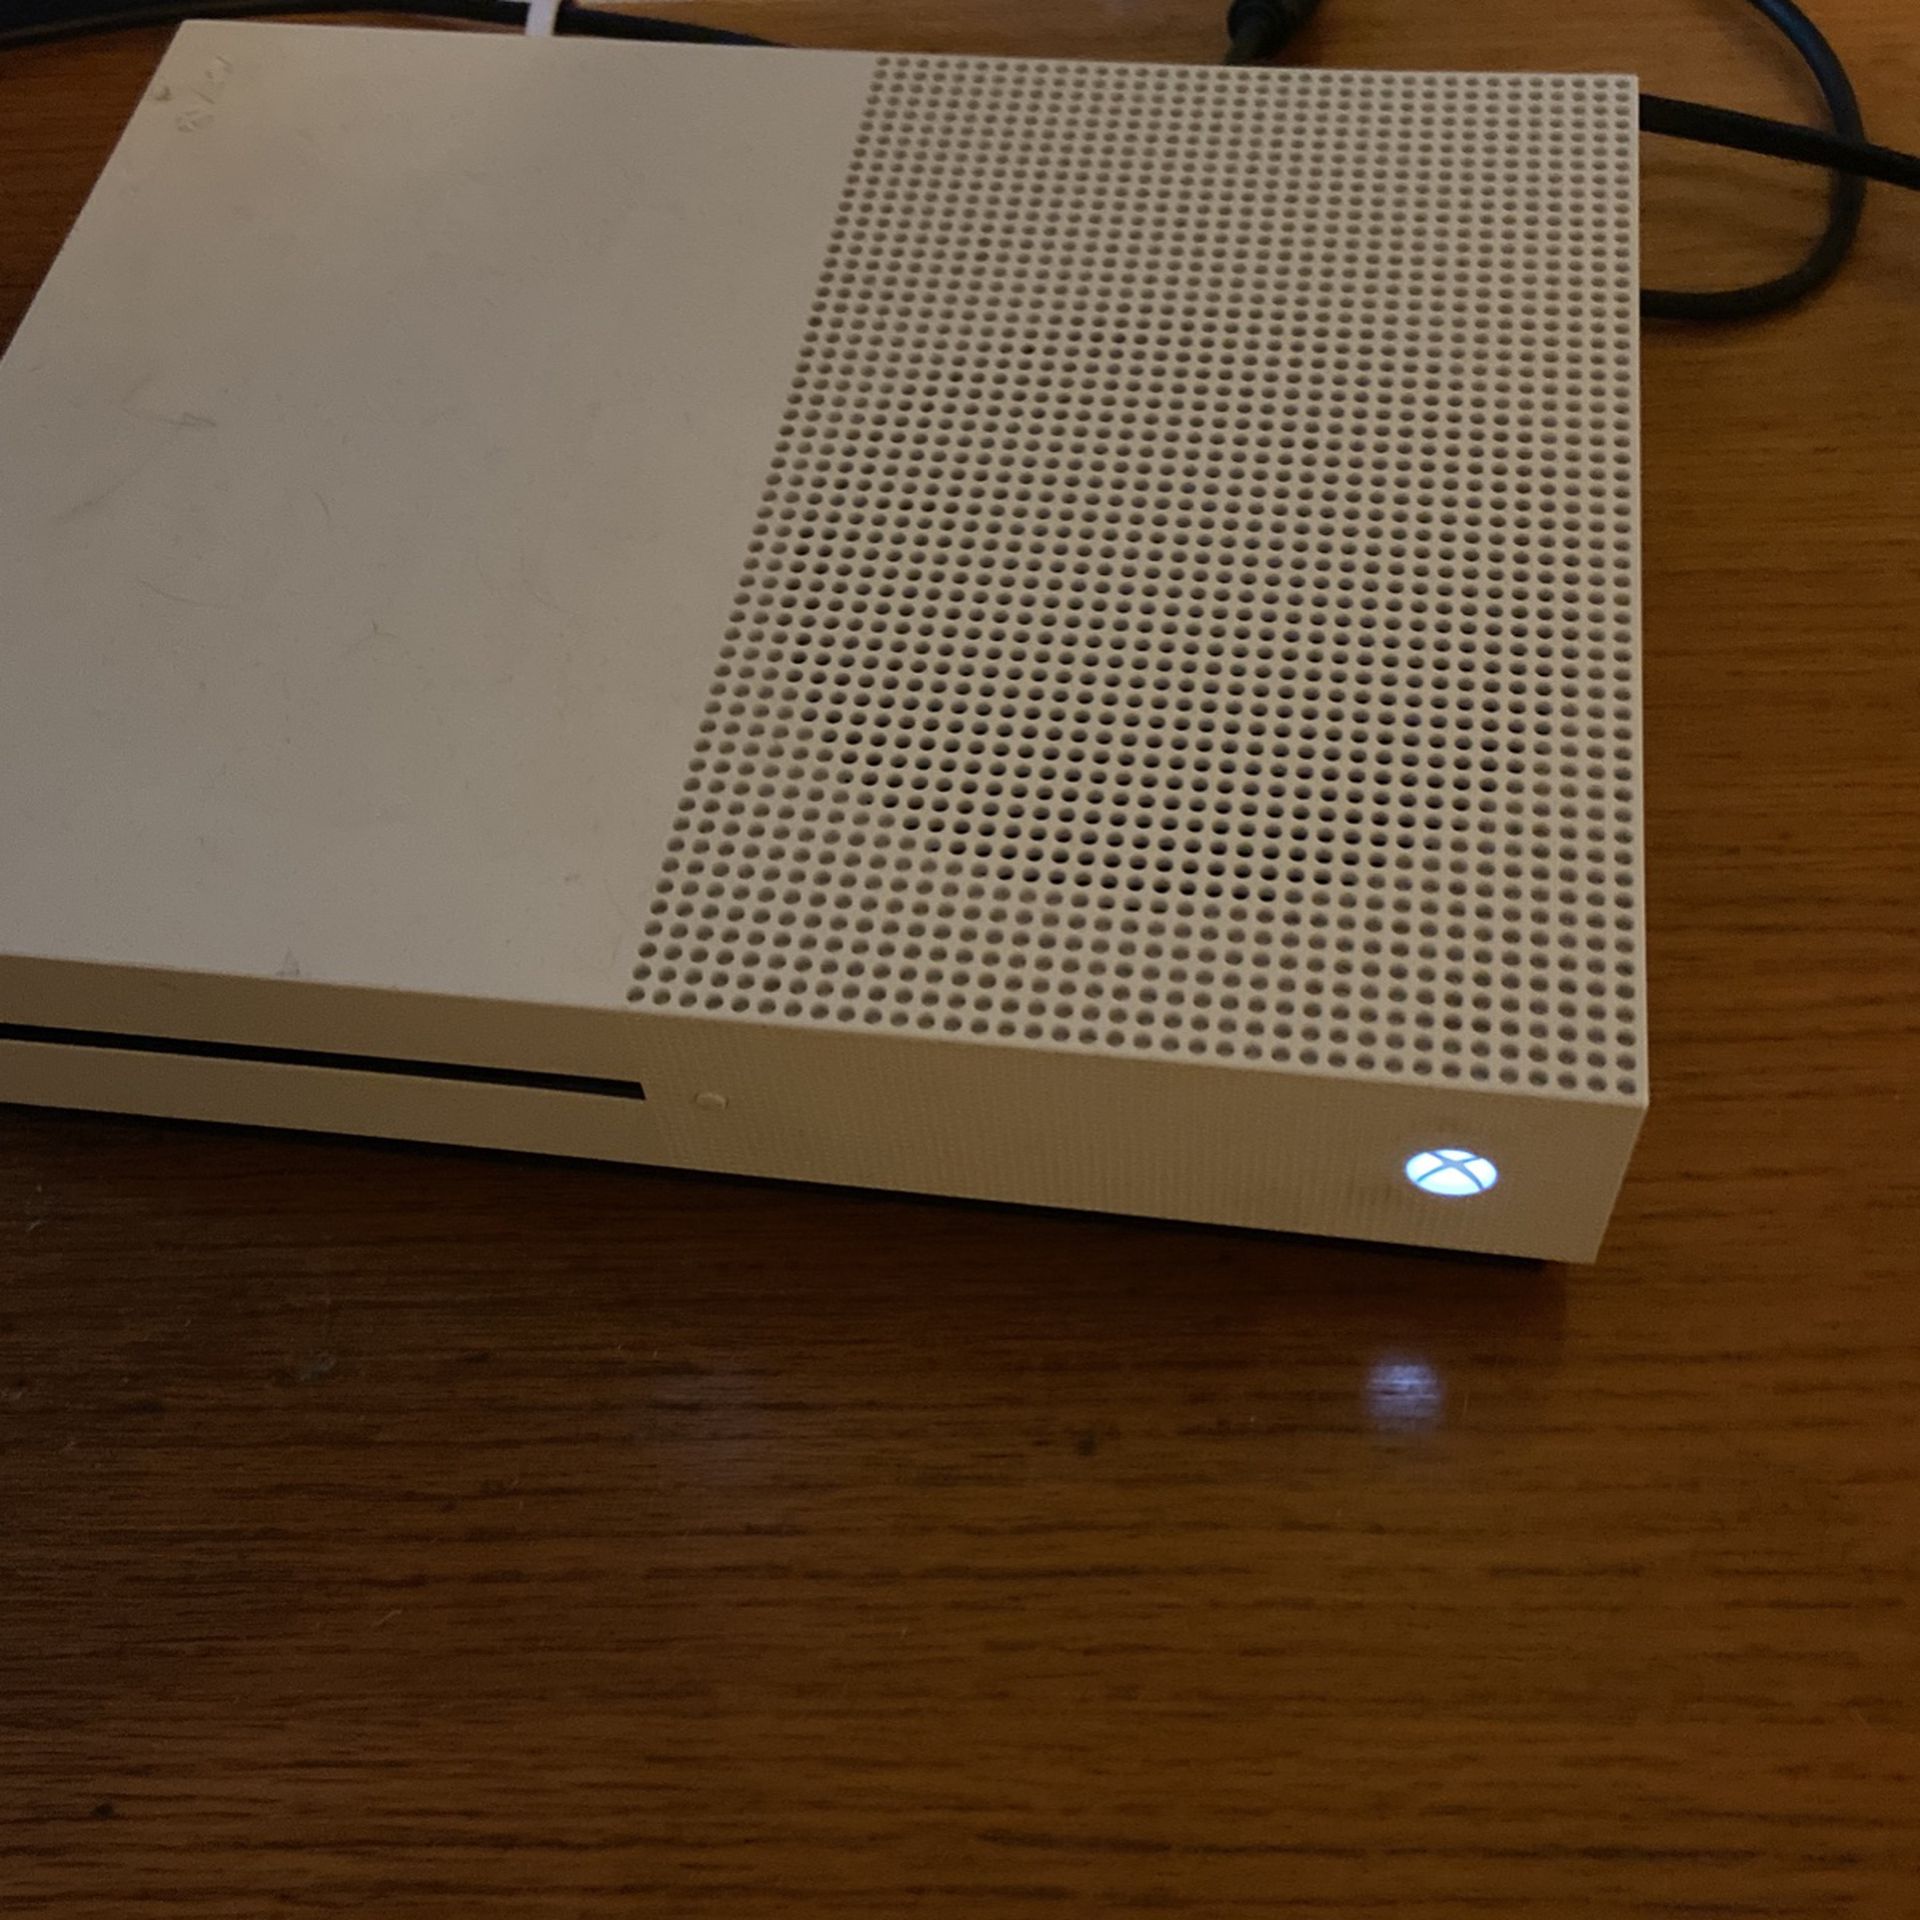 XBOX one s 500gb +Turtle Beach headset and controller 